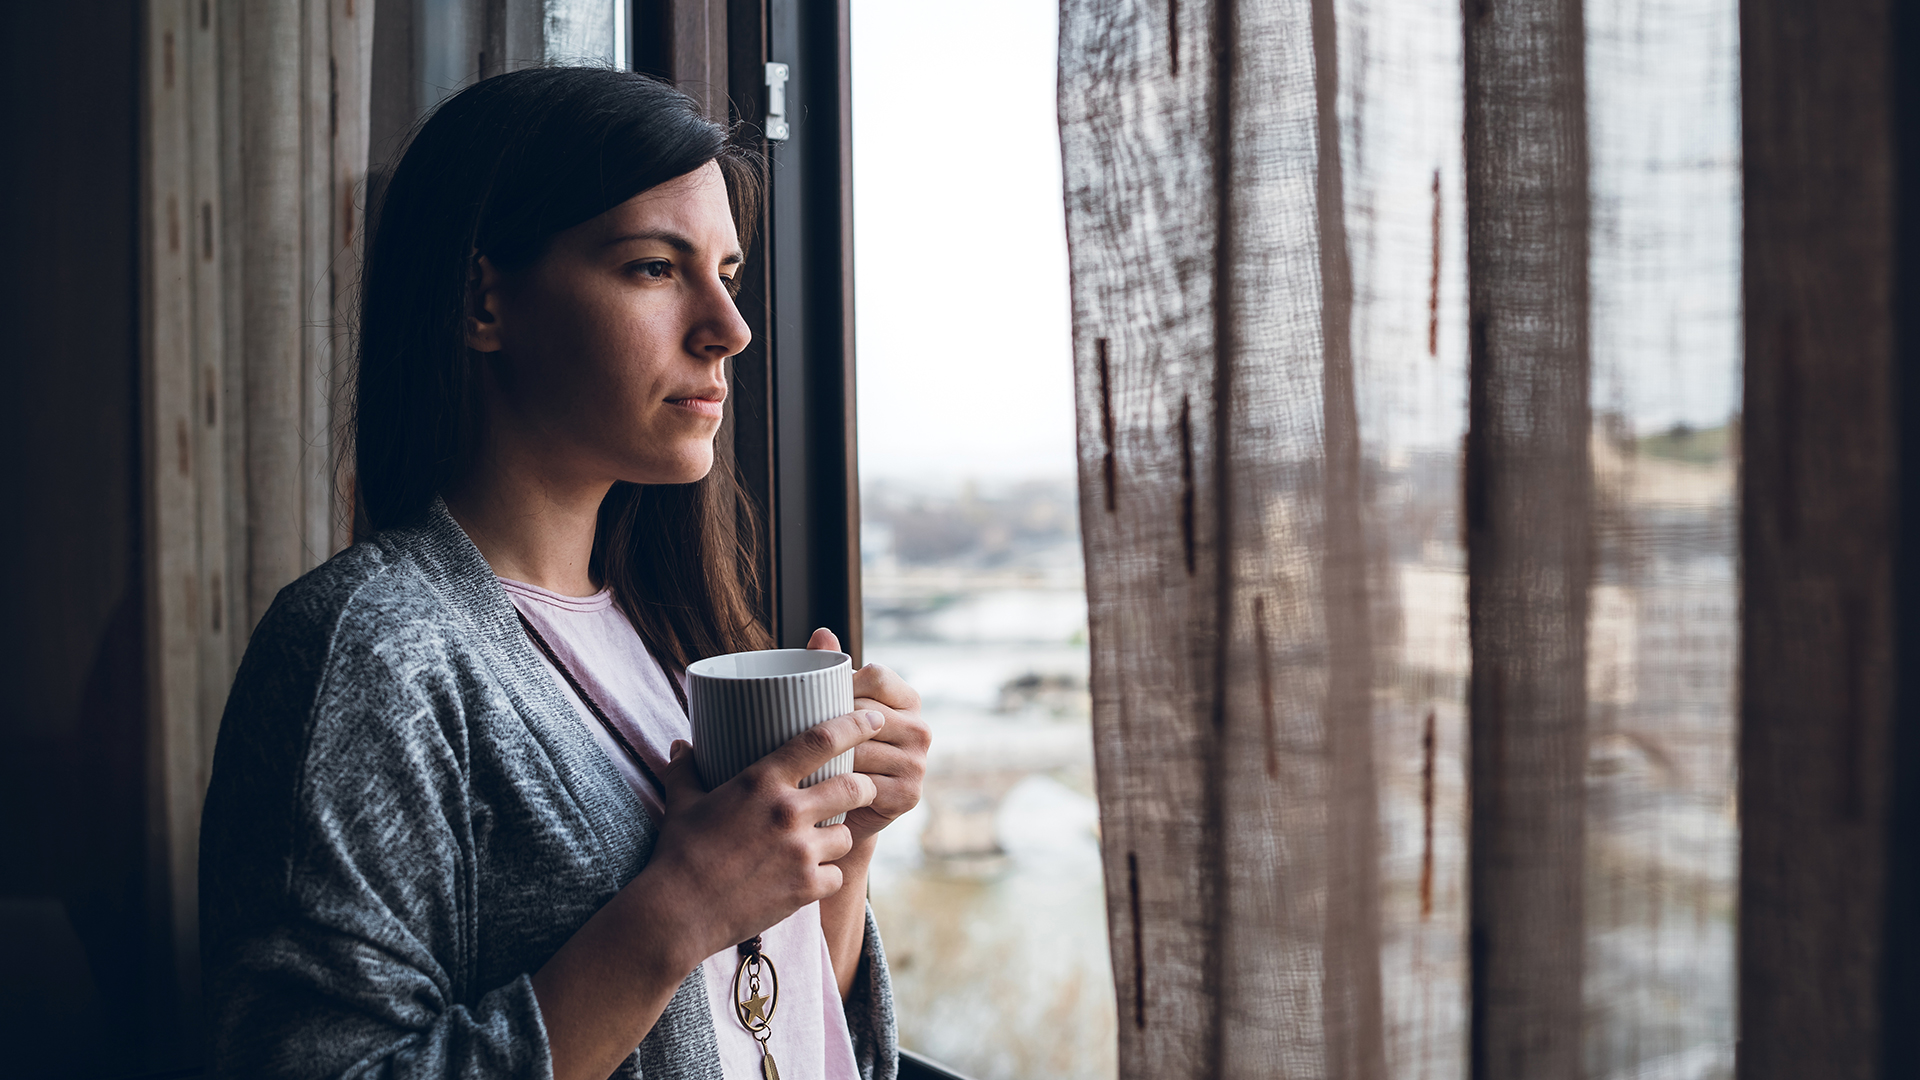 Lady looking out window with coffee | AdvancedMD